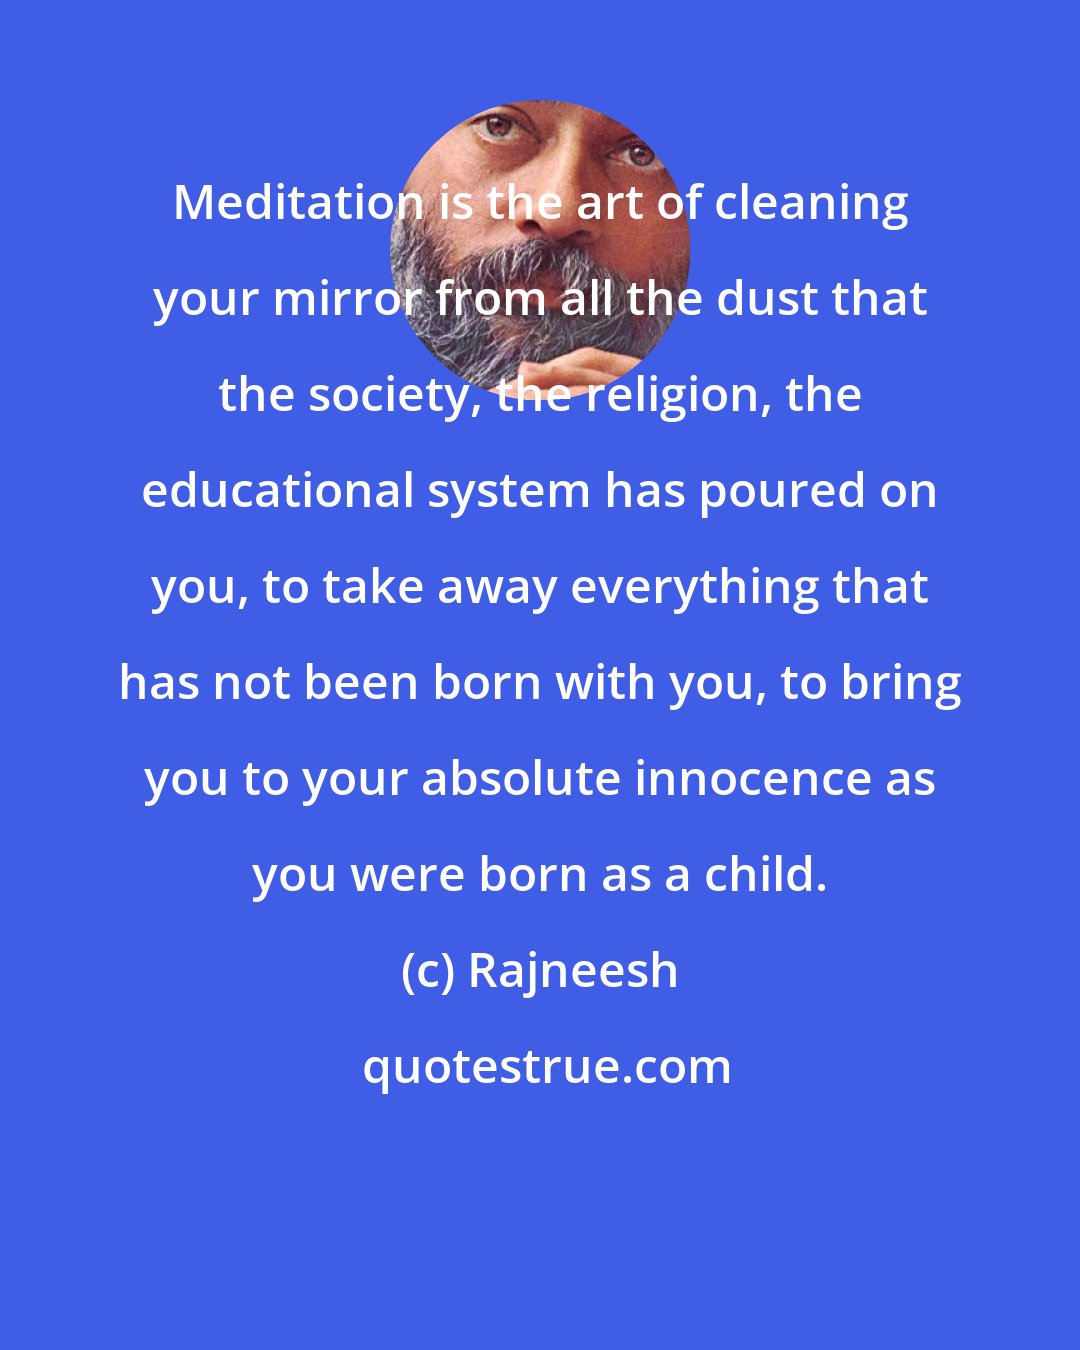 Rajneesh: Meditation is the art of cleaning your mirror from all the dust that the society, the religion, the educational system has poured on you, to take away everything that has not been born with you, to bring you to your absolute innocence as you were born as a child.